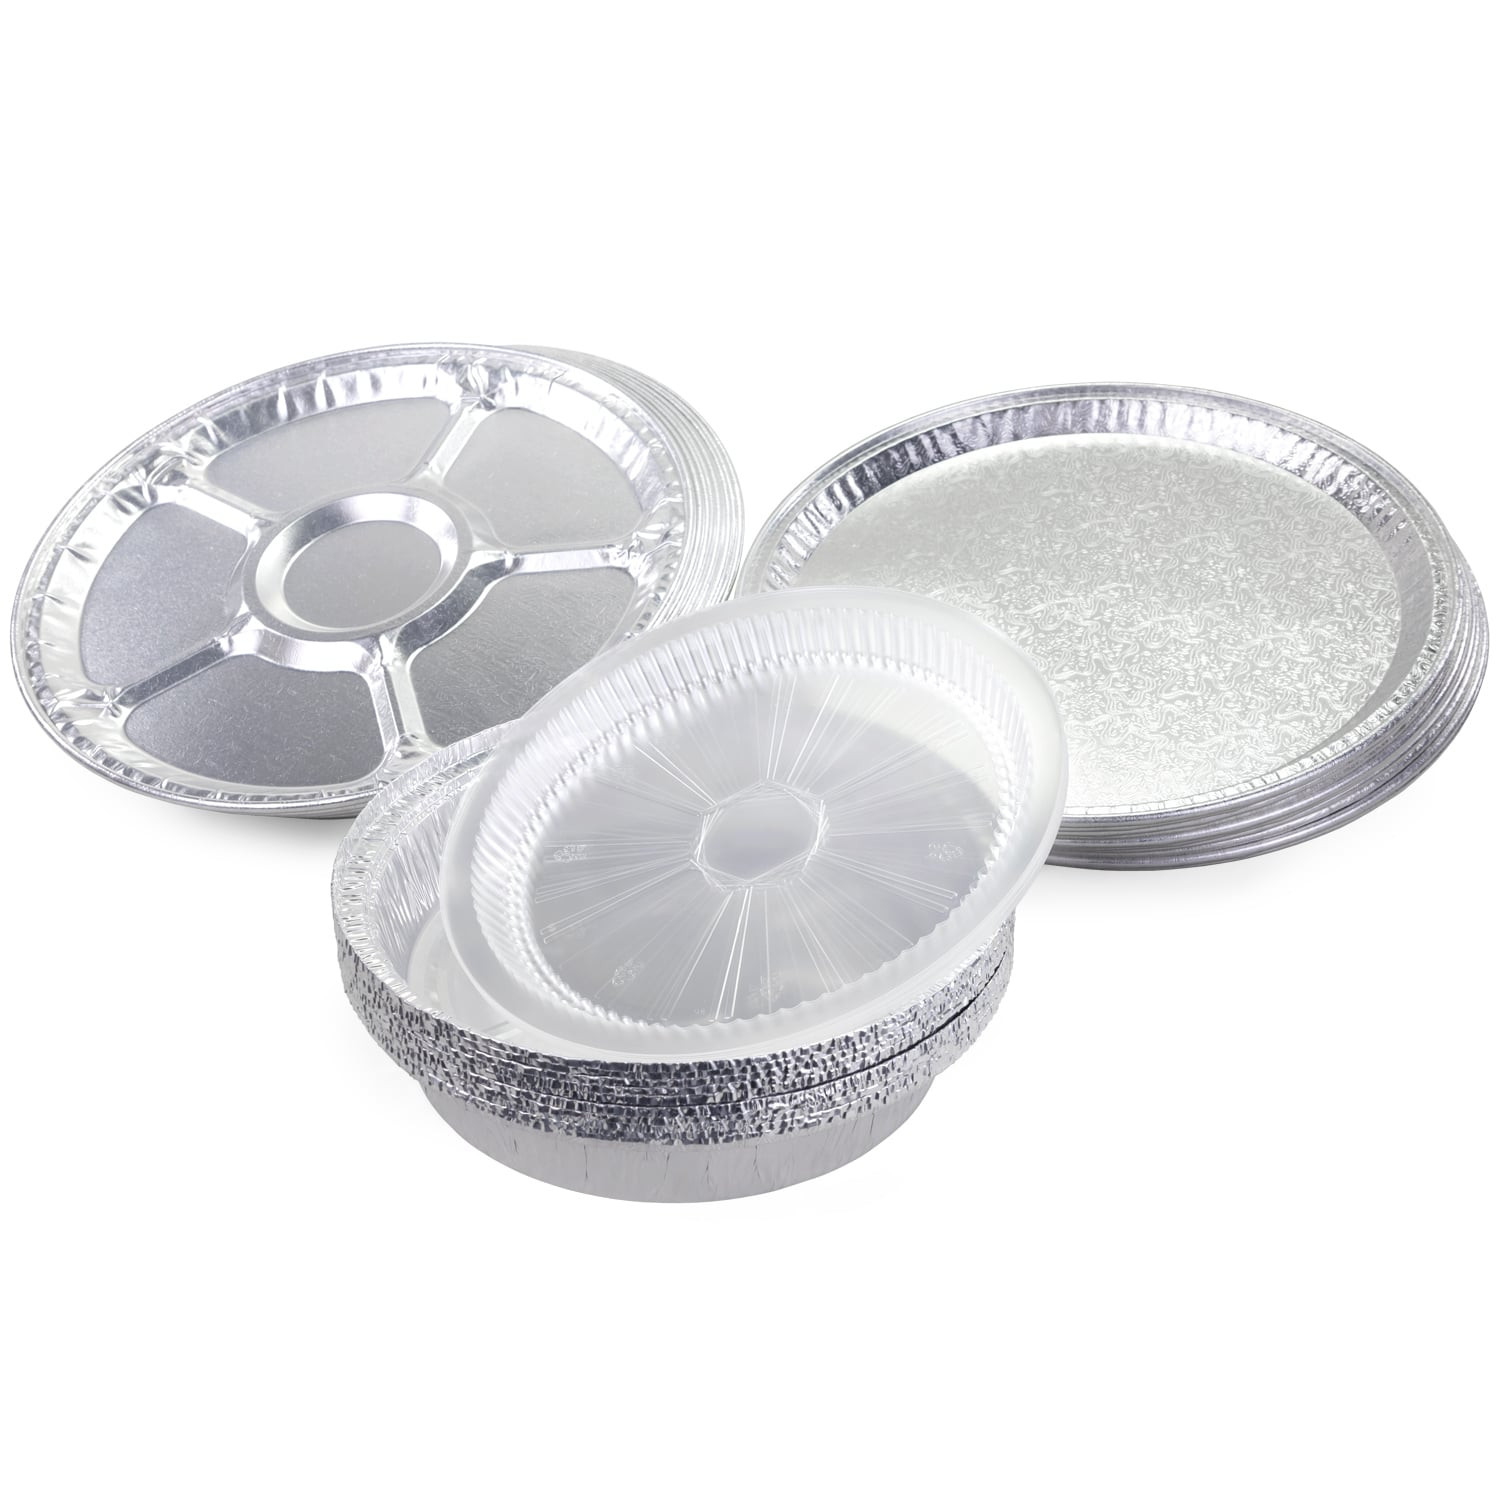 Aluminum Catering Set with Lazy Suzan Trays, Flat Trays and Pans